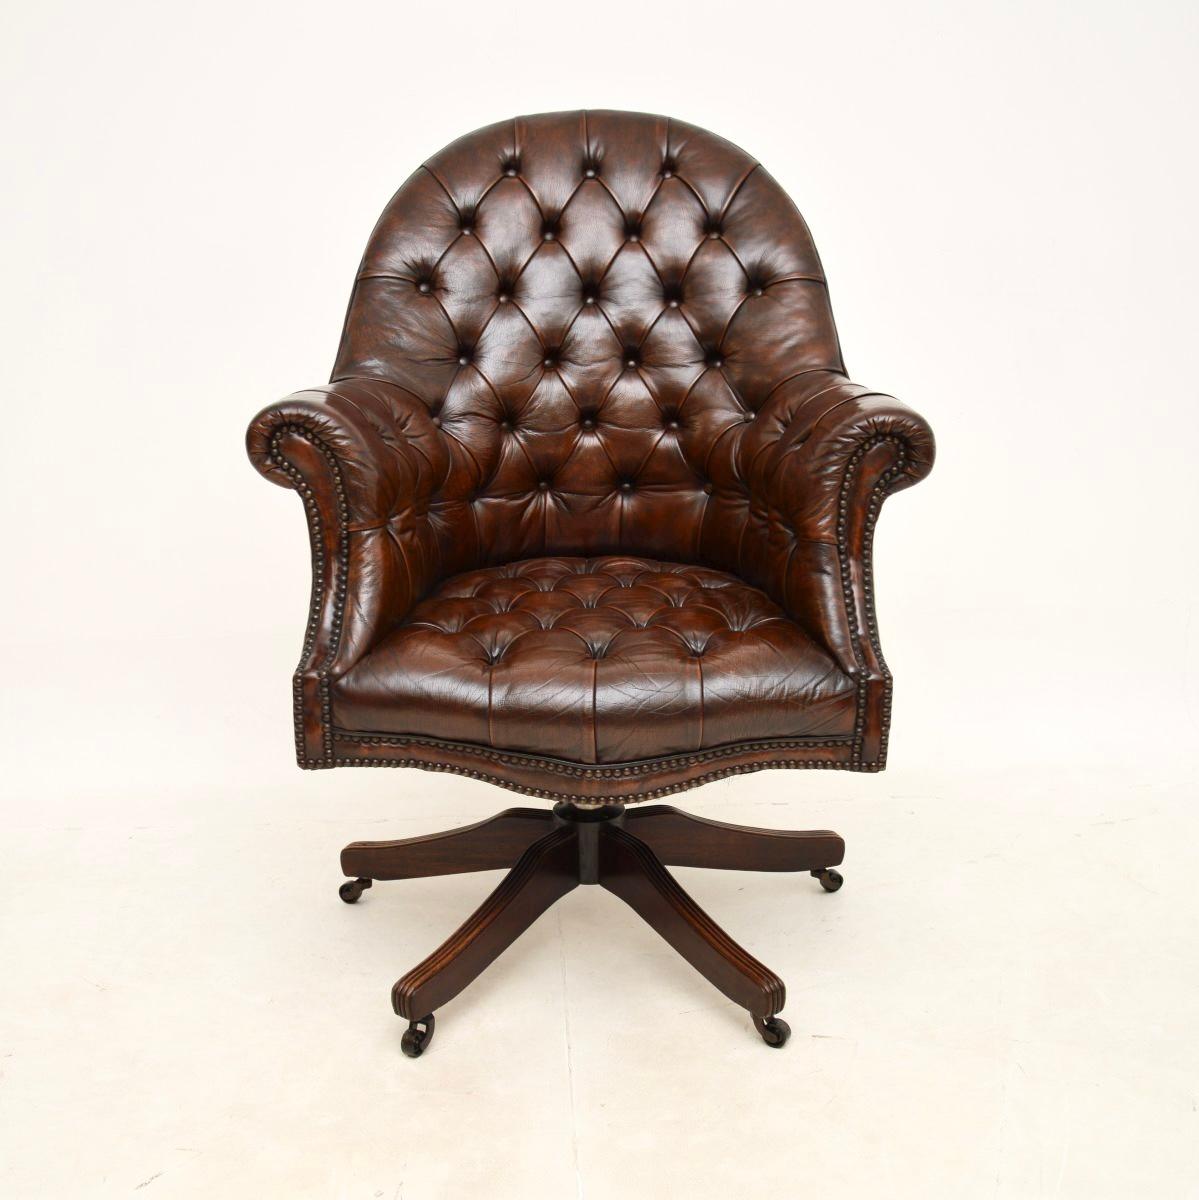 A smart and extremely well made antique Victorian style leather swivel desk chair. This was made in England and dates from around the 1950’s.

It is of superb quality, this is generous in proportions and is extremely comfortable to relax in. It